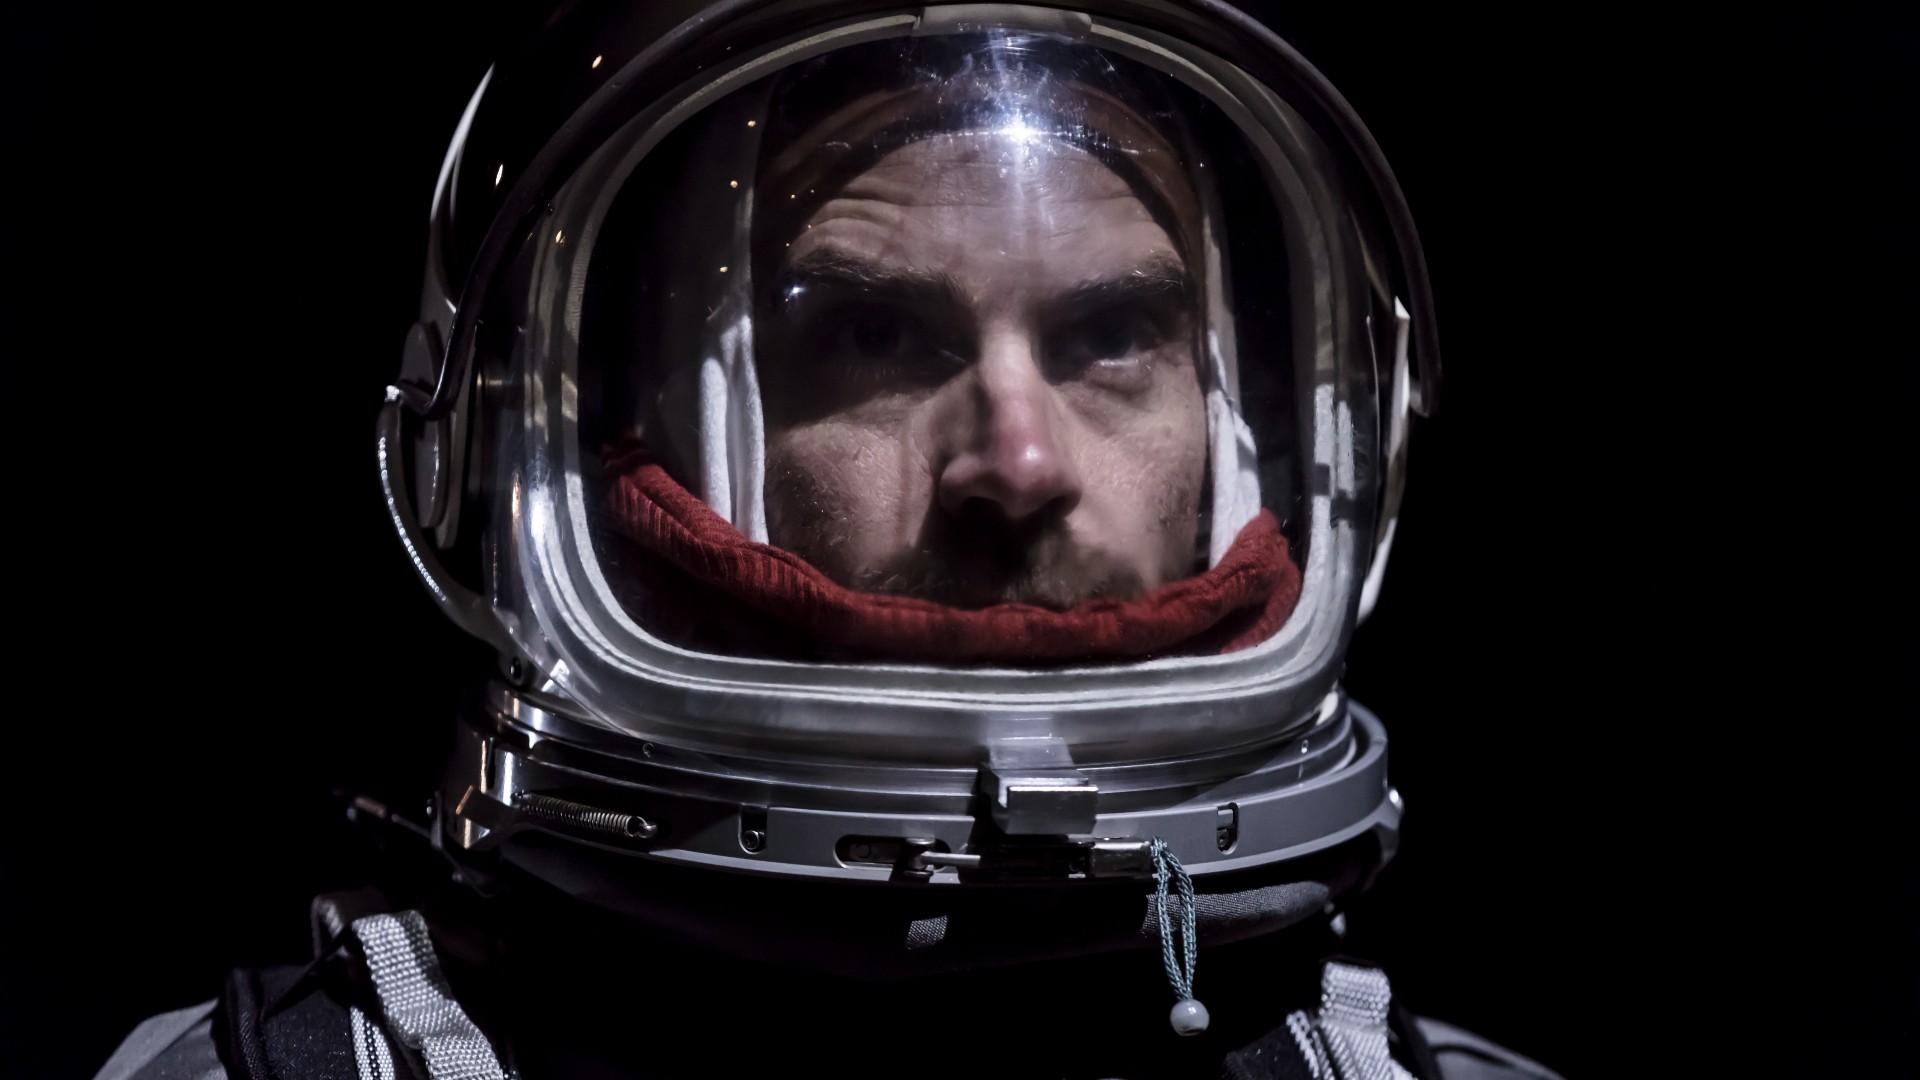 Space headaches' are a literal pain for astronauts. Why do they happen?